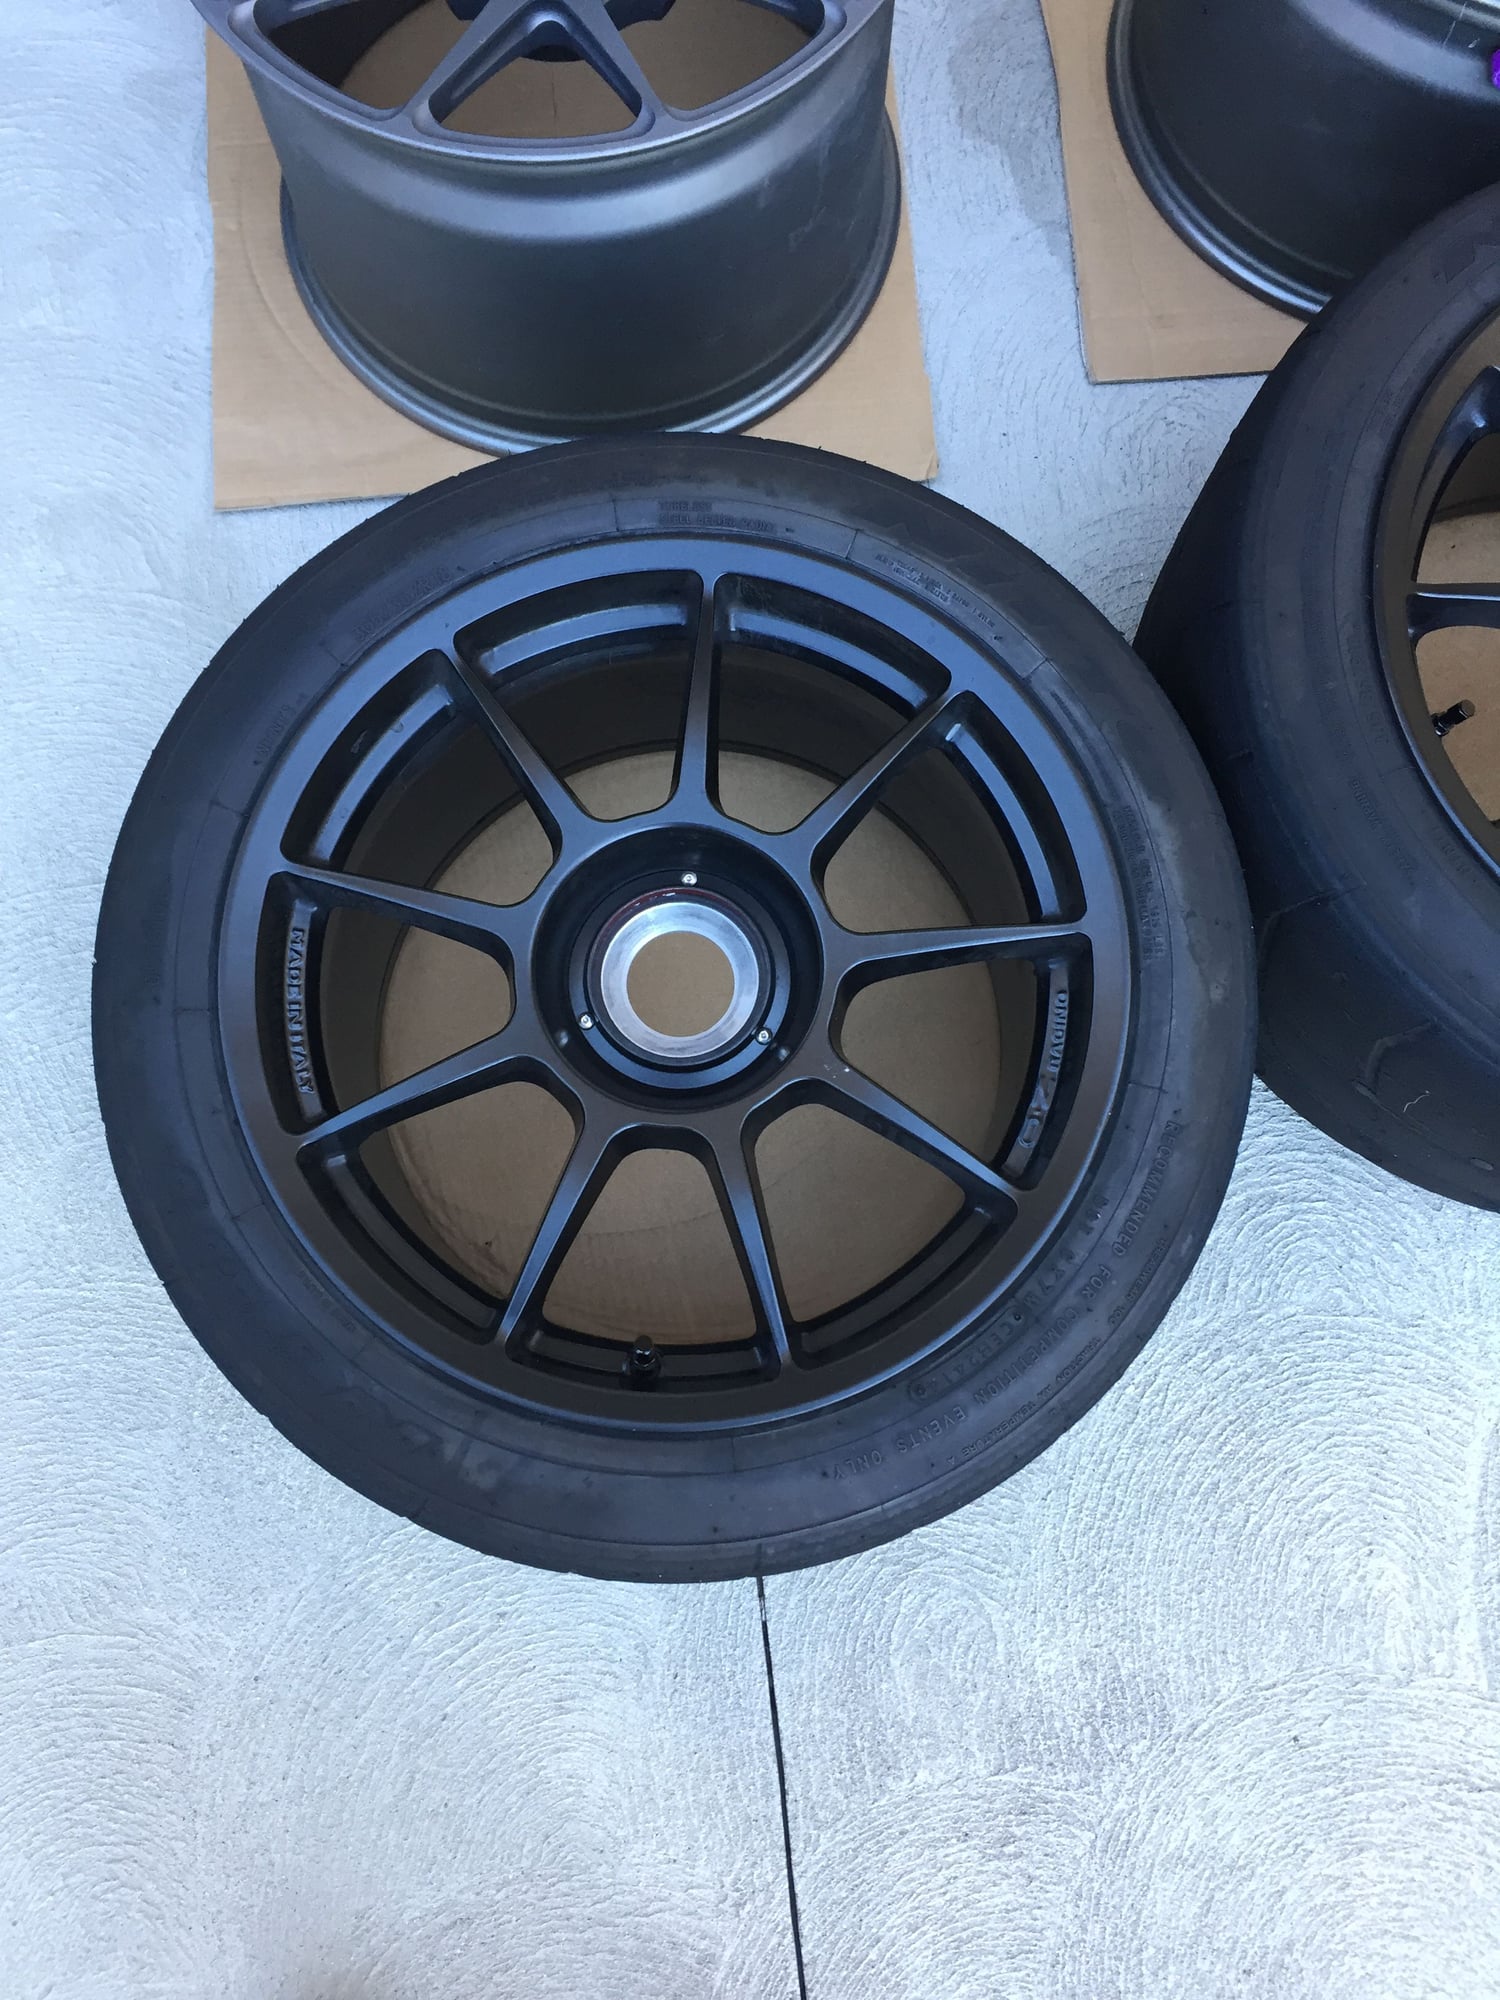 Wheels and Tires/Axles - FS: OZ Challenge center lock track wheels for NB 997.2 GT3 - Used - 2010 to 2011 Porsche GT3 - Los Angeles, CA 90402, United States